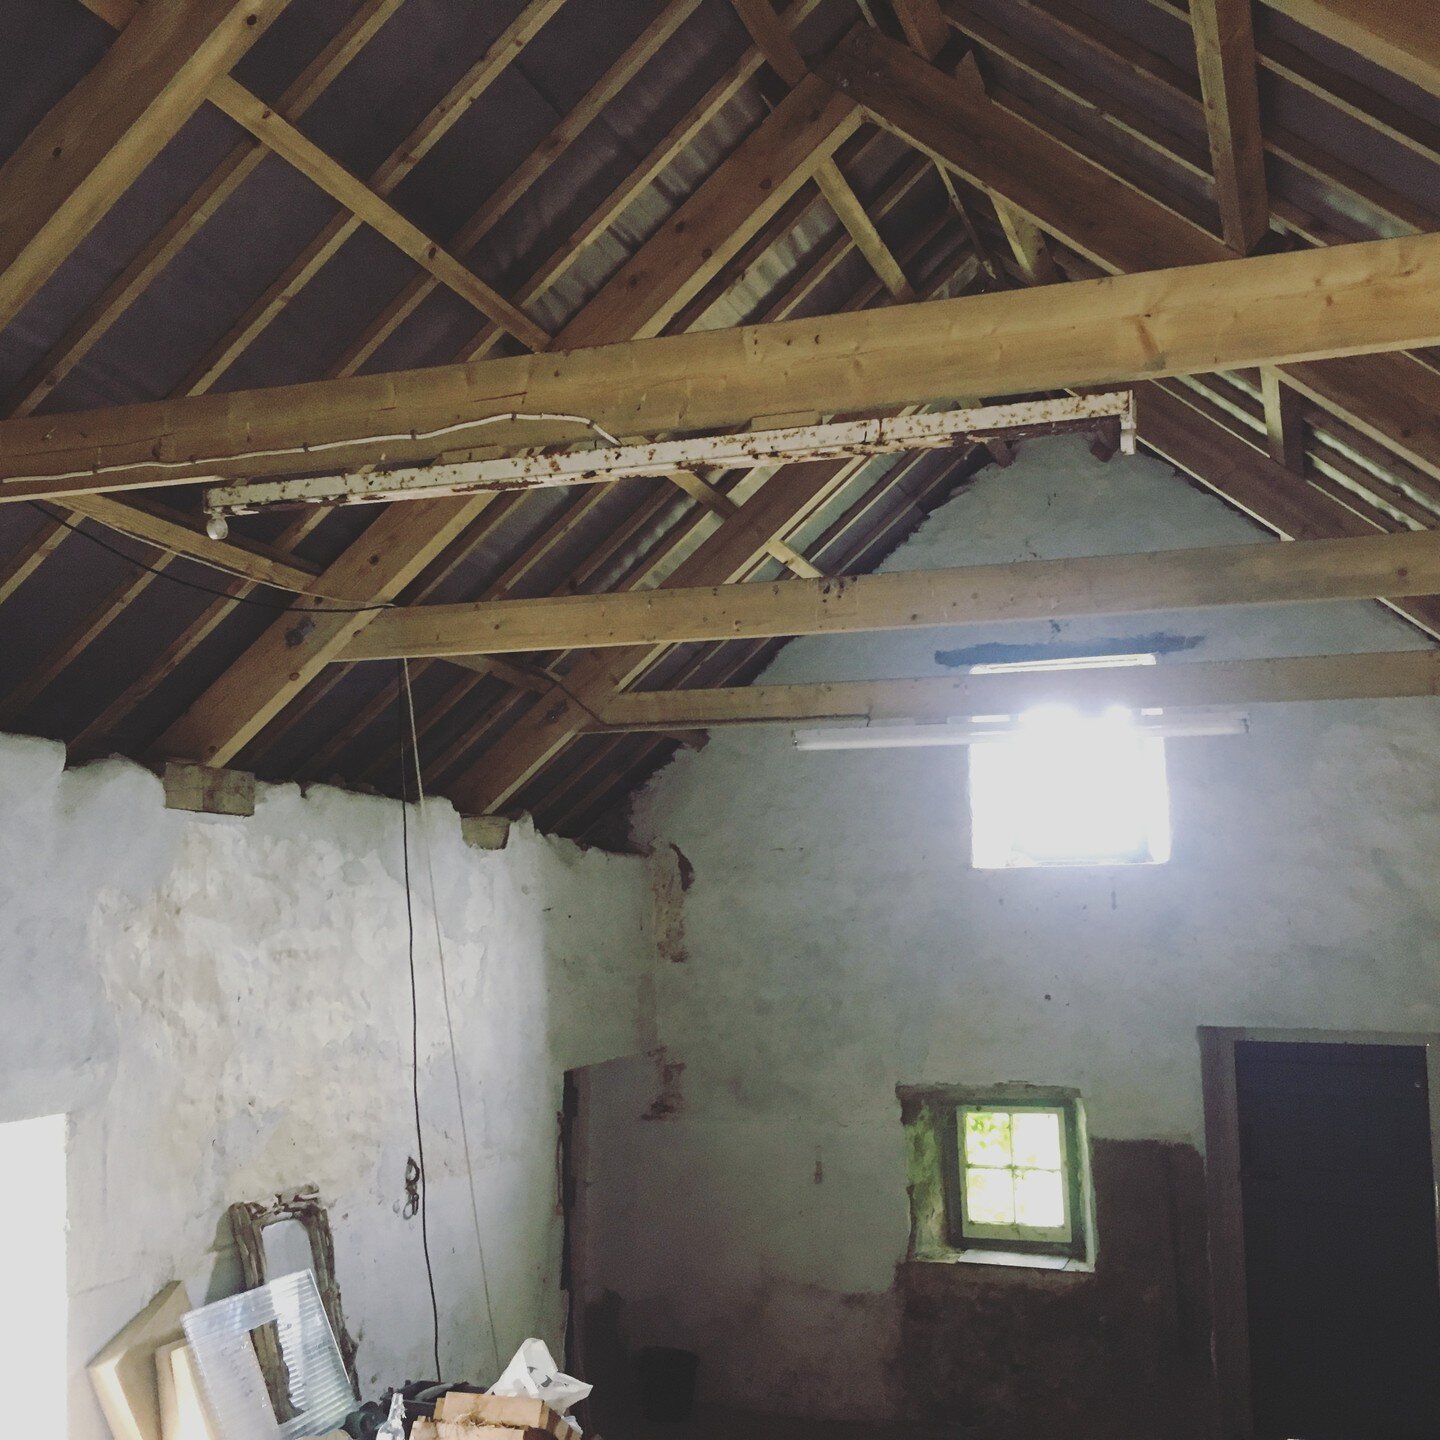 I recently visited Mill Cottage at the Newport Castle Estate. It's a Grade II Listed conversion, which converted the rear barn area and linked it to the main dwelling. Nice to see it almost complete, and to look at the before and after photos